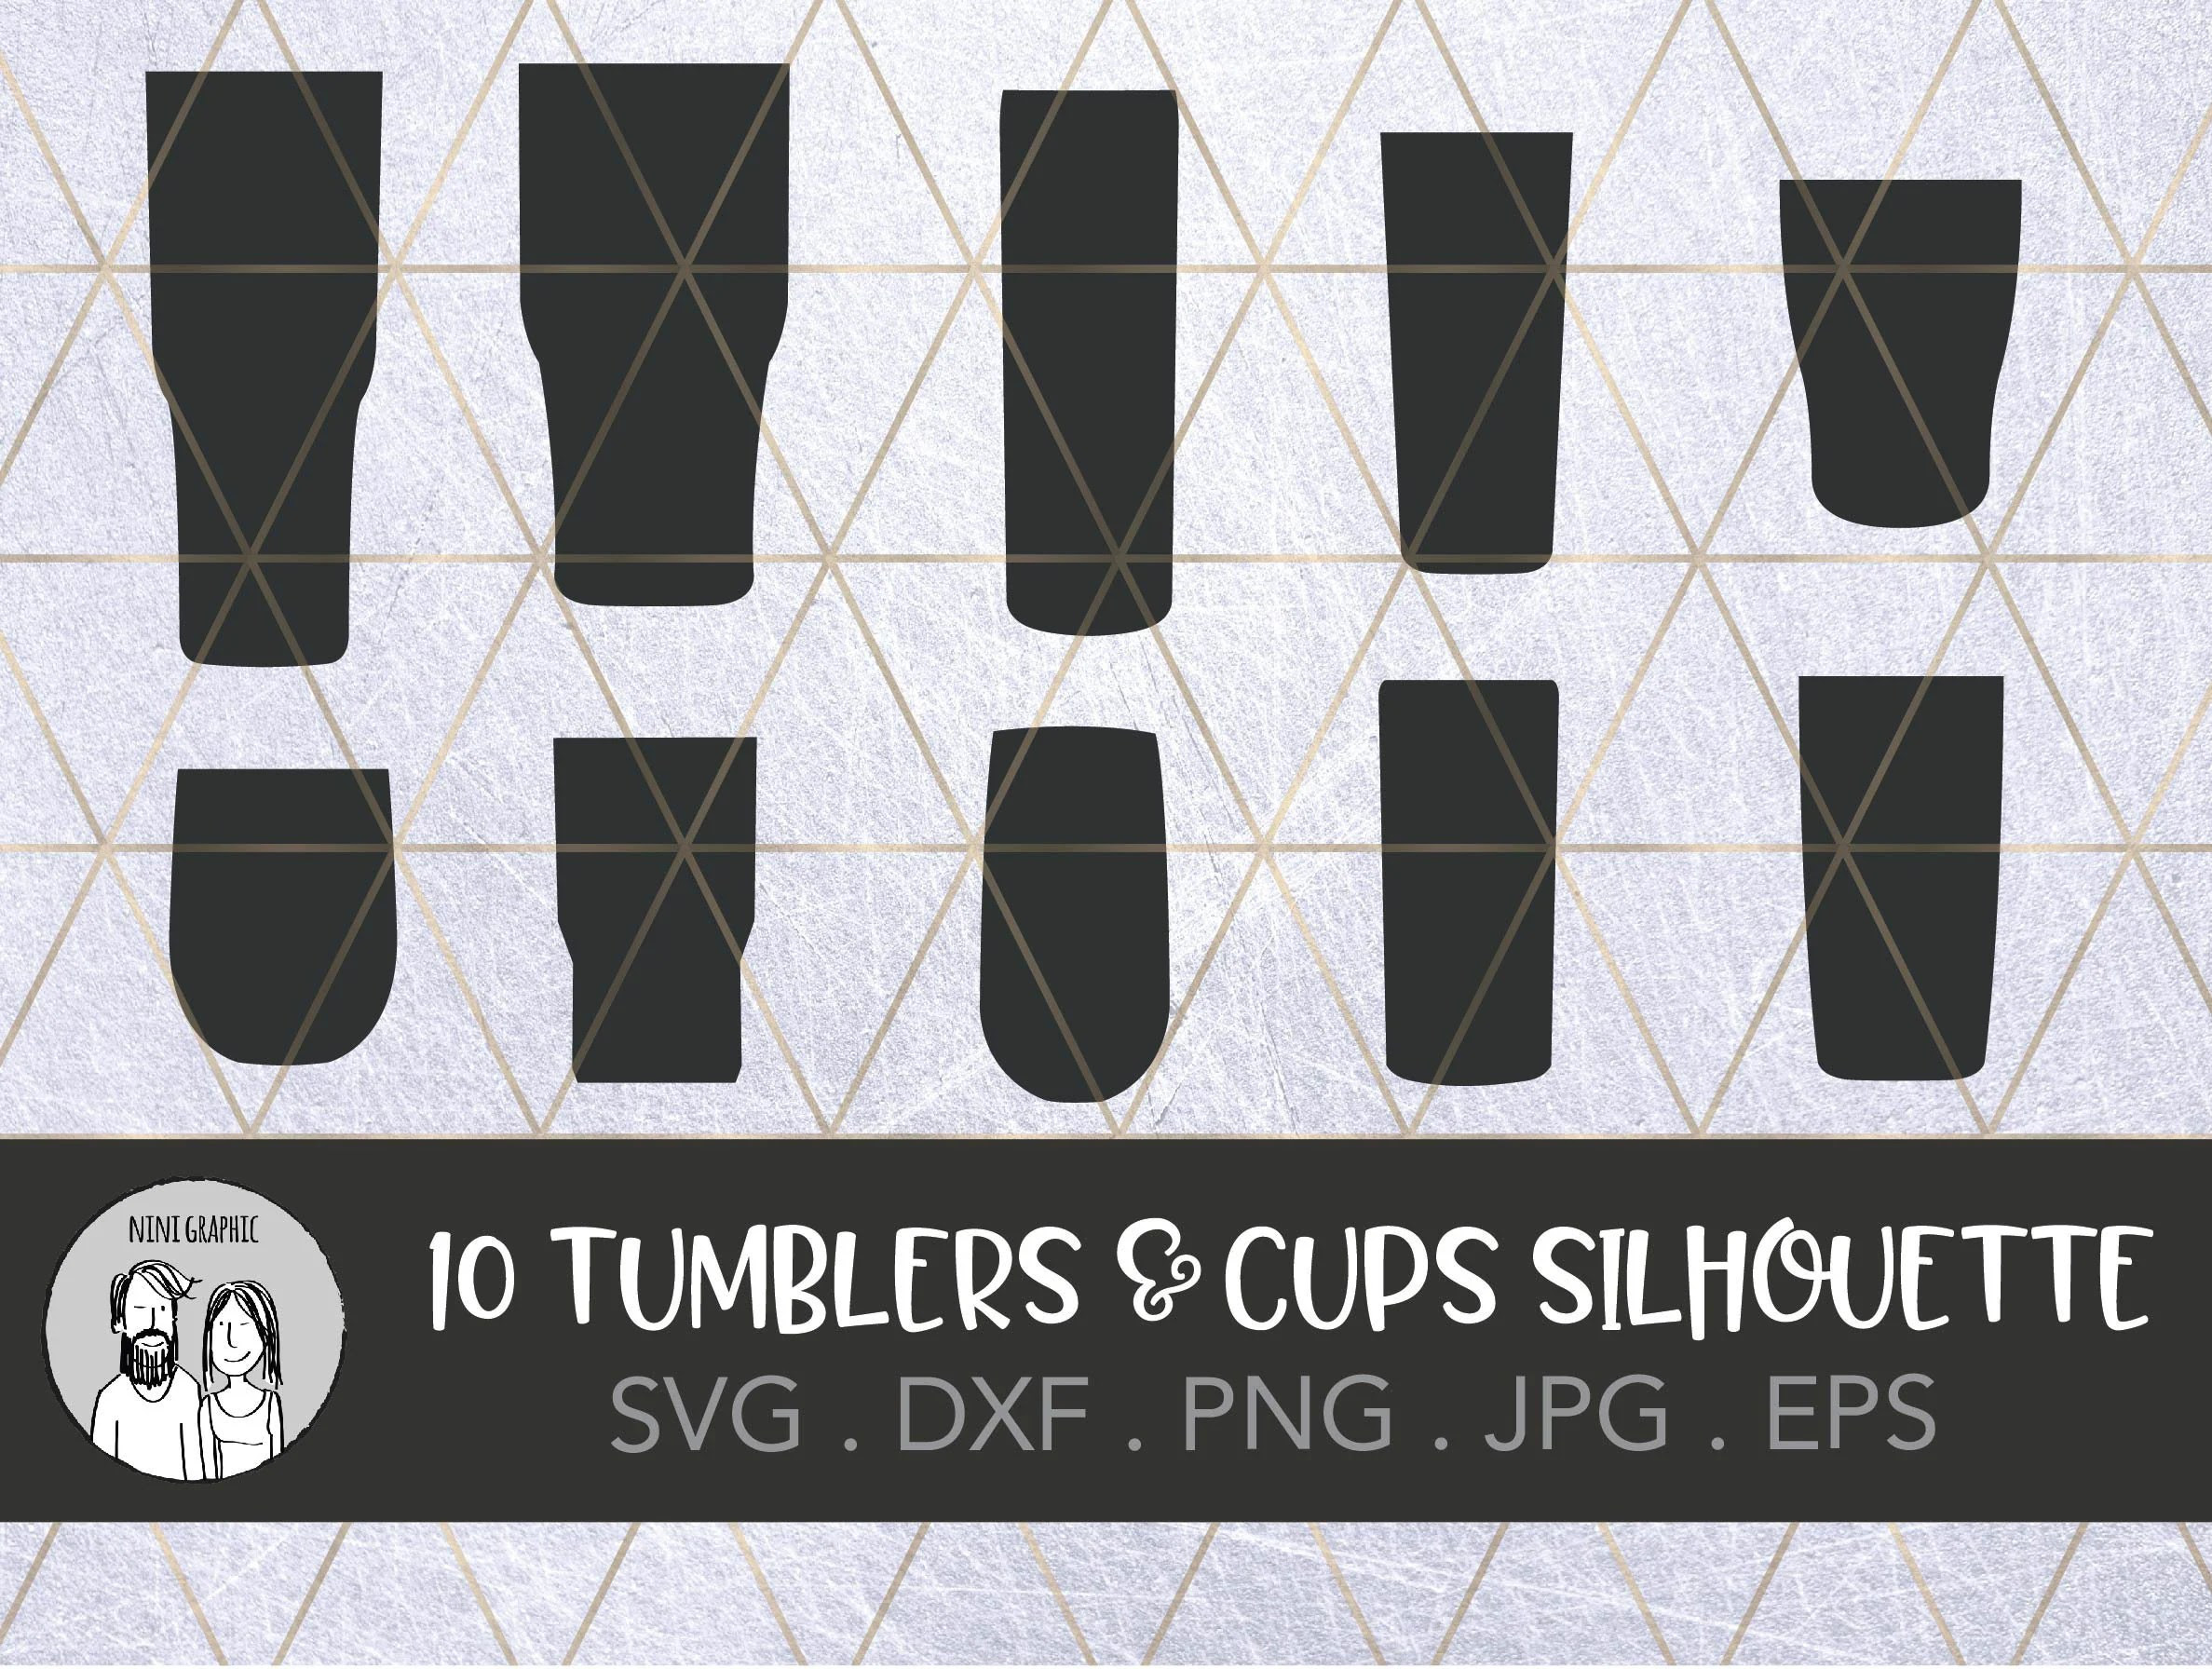 SVG Cut File 10 Tumblers Cups Silhouette PNG JPG Clipart Etsy